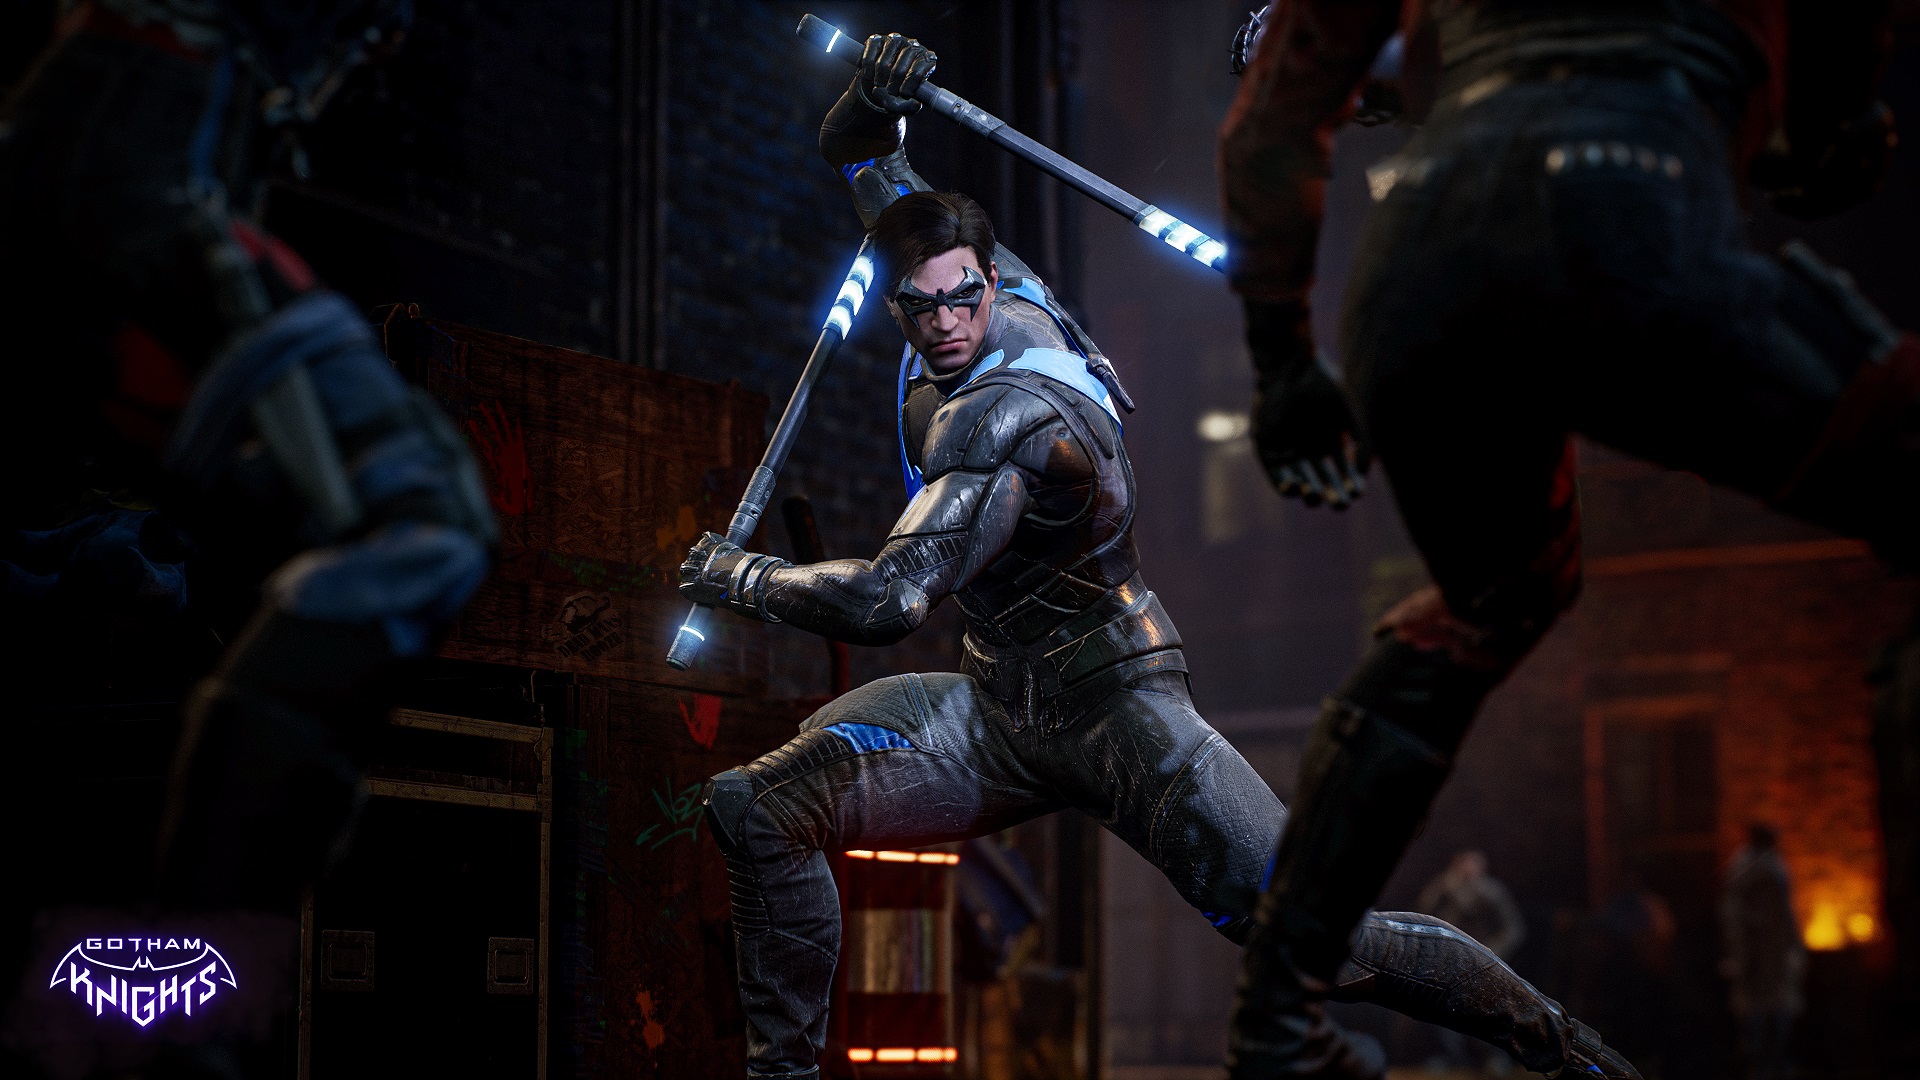 Gotham Knights releasing Oct. 25, PS4 and XBO versions cancelled